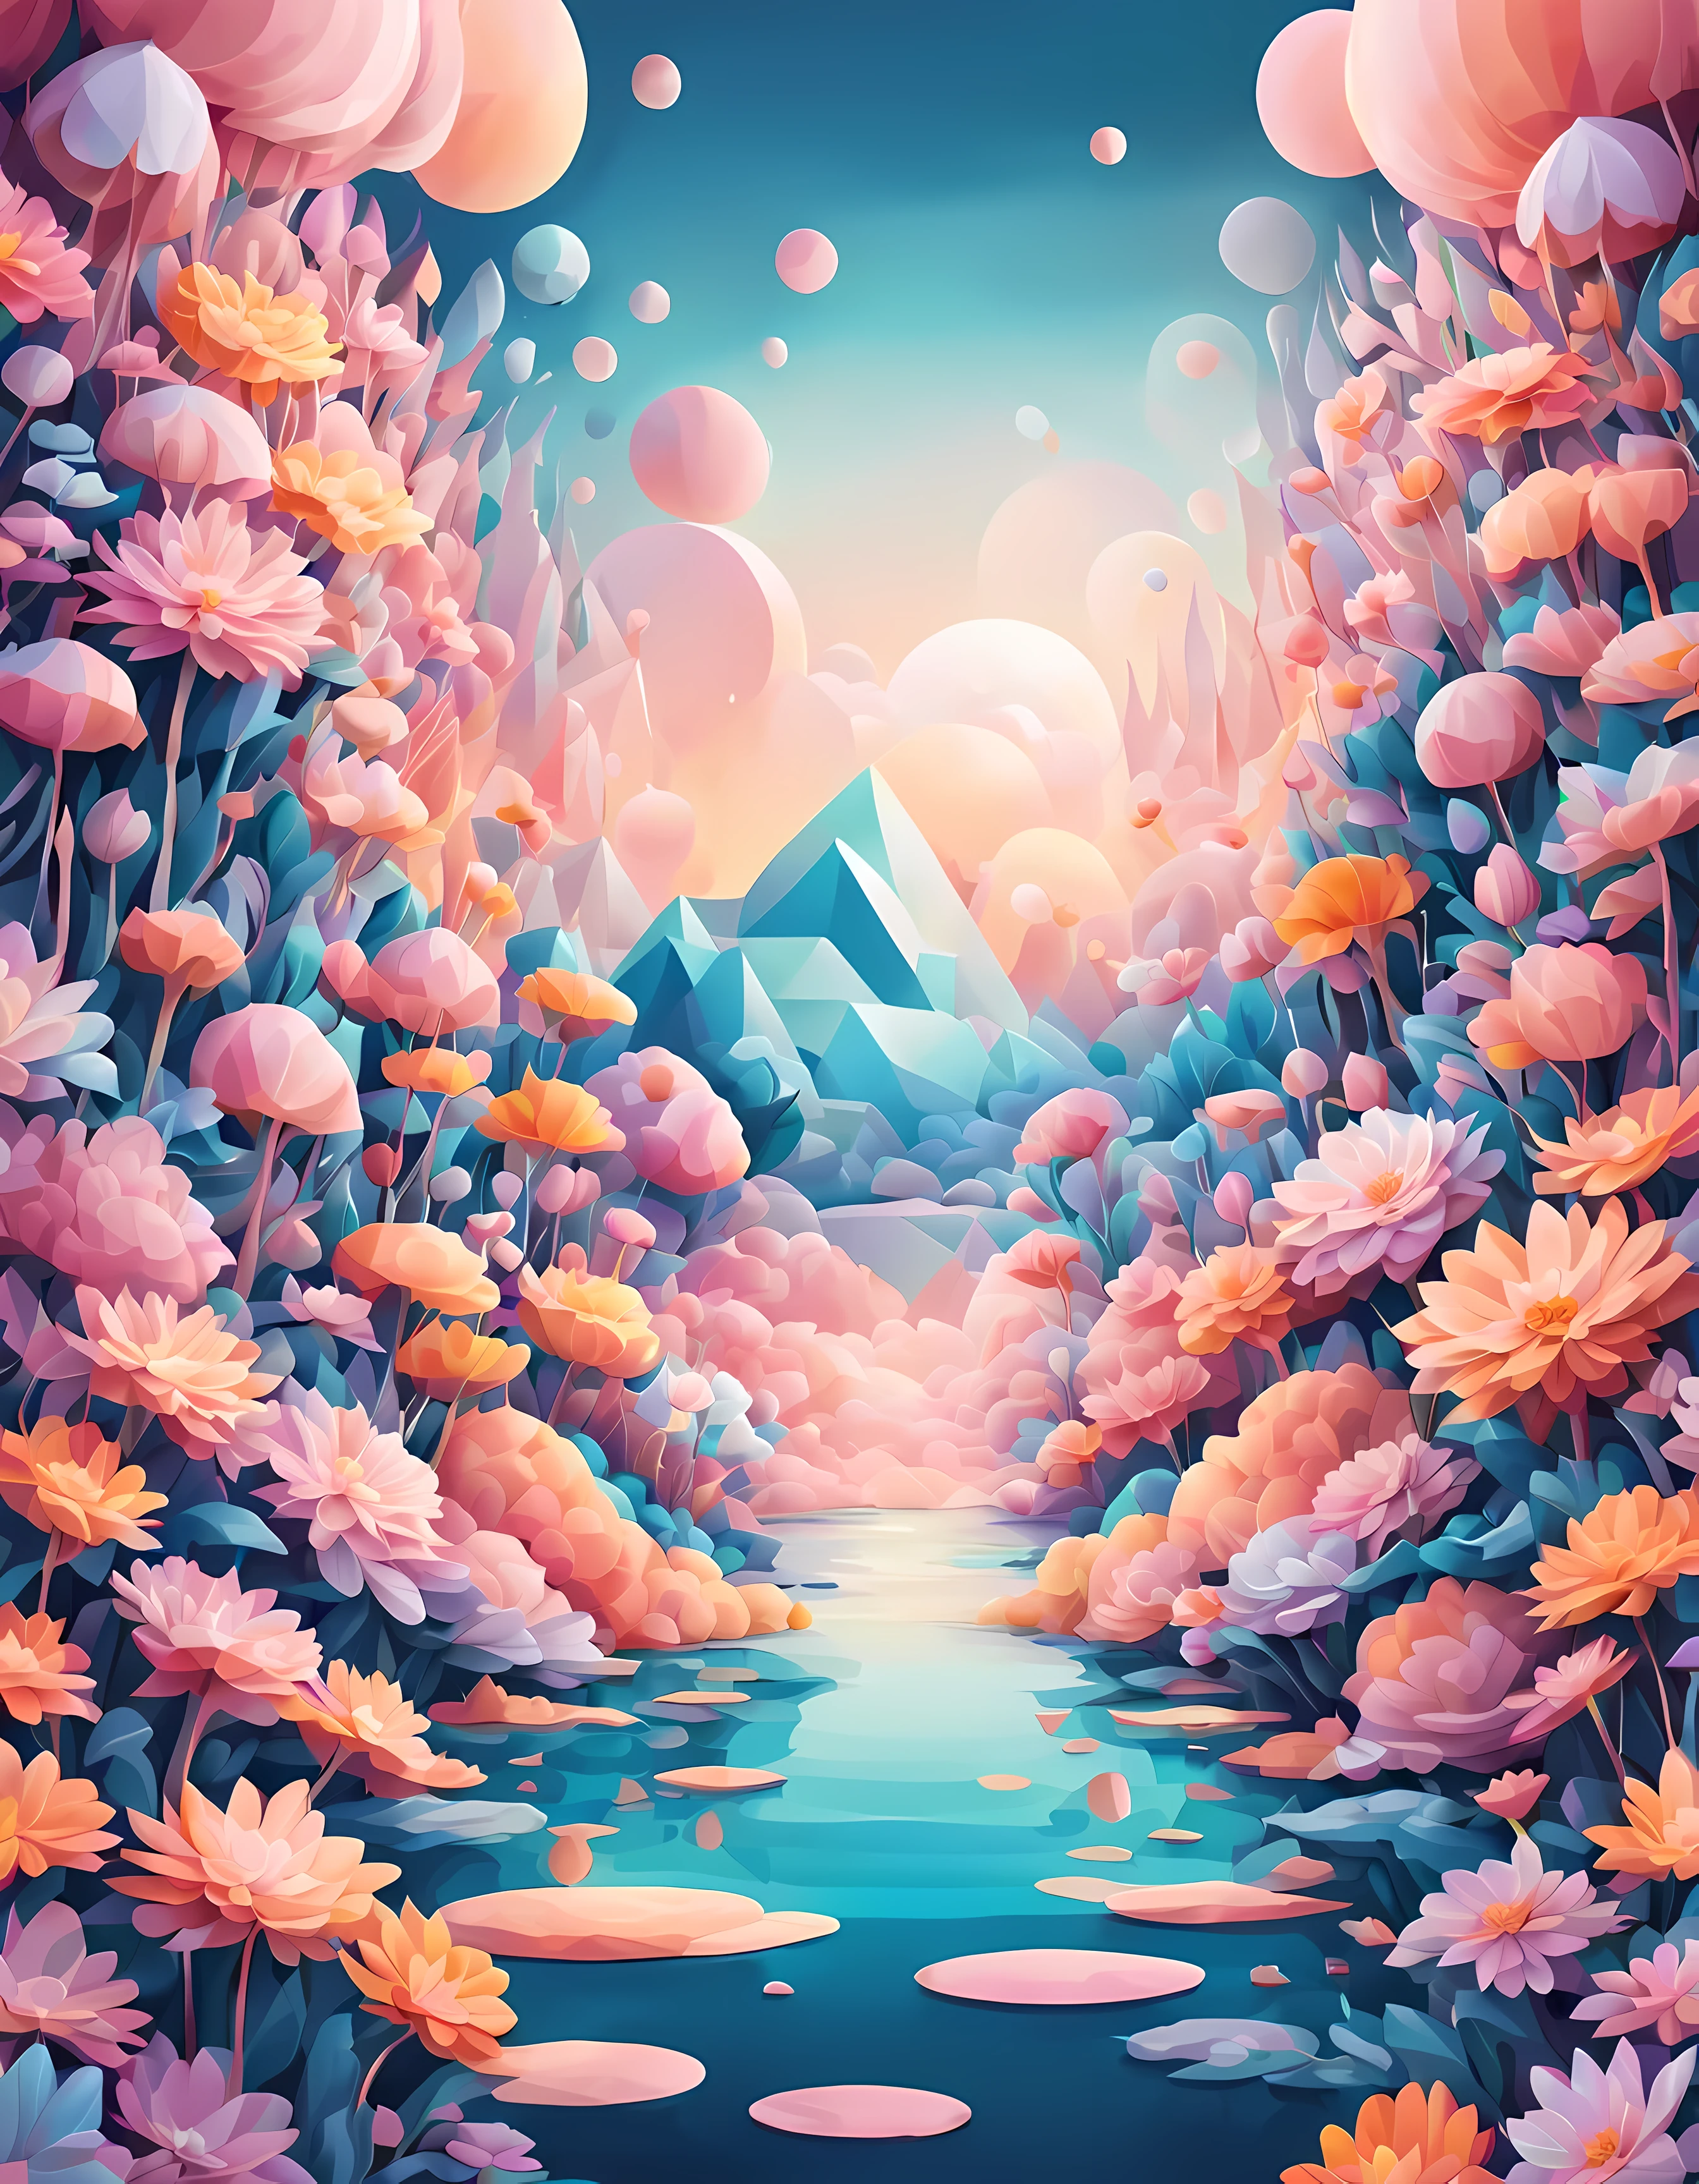 Design a visually captivating surreal ((cosmic)) masterpiece where celestial ((flowers)) are vibrant geometric shapes in a sea of ethereal pastel hues, each petal represents a distant galaxy, and the interplay of colors and patterns forms an otherworldly landscape, masterpiece in maximum 16K resolution, superb quality. | ((More_Detail))
